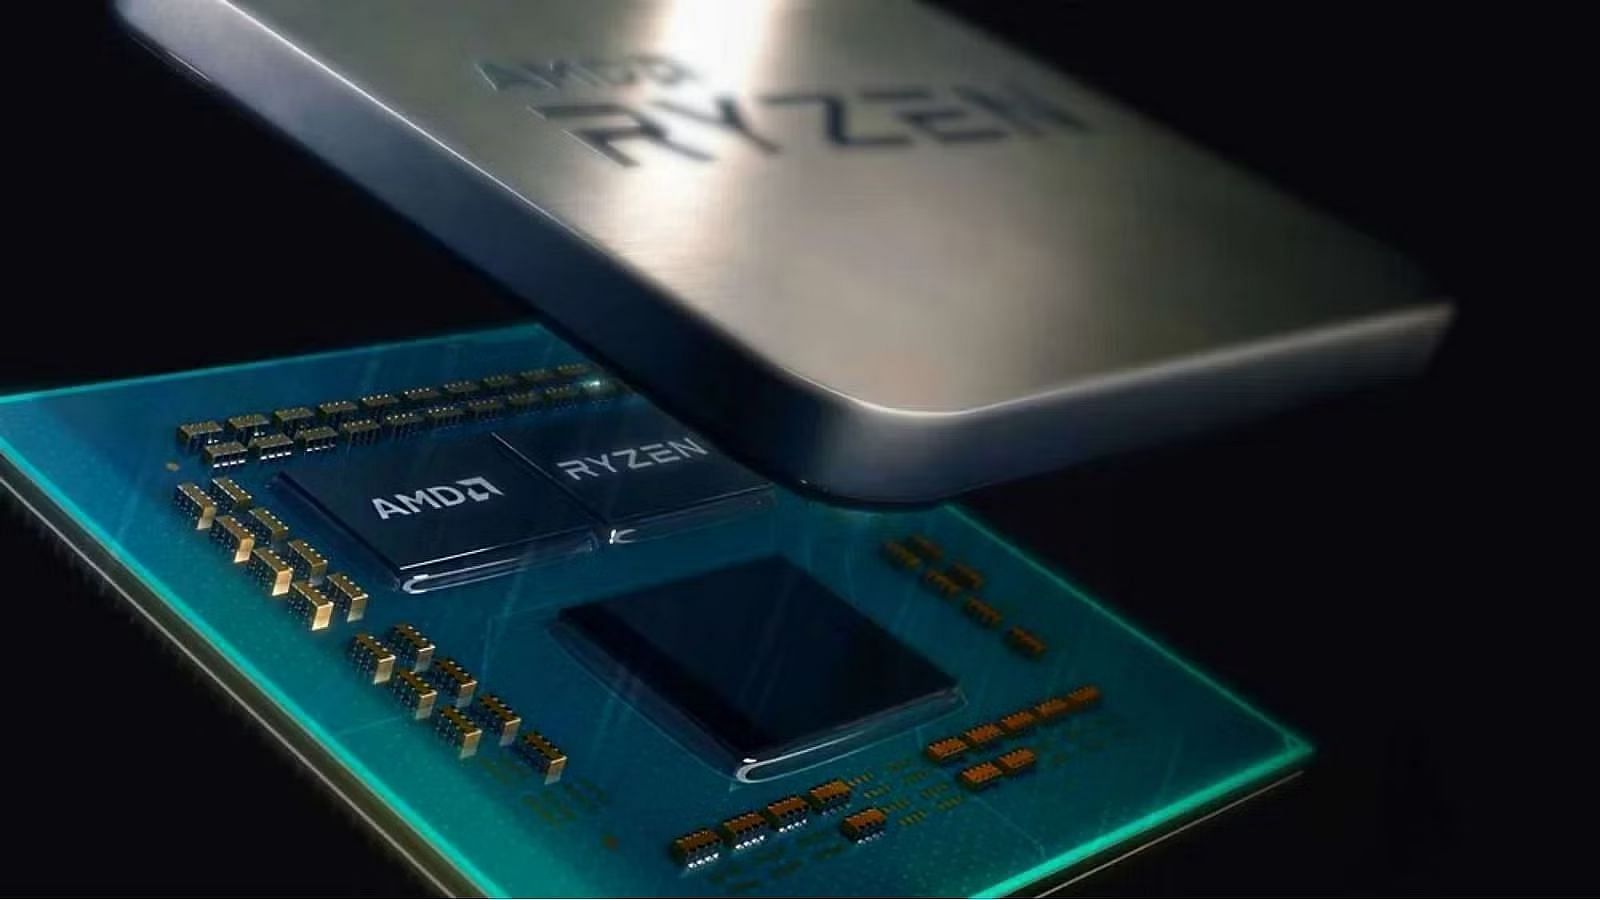 The Ryzen 5 5600X is a capable mid-range chip for gaming (Image via AMD)